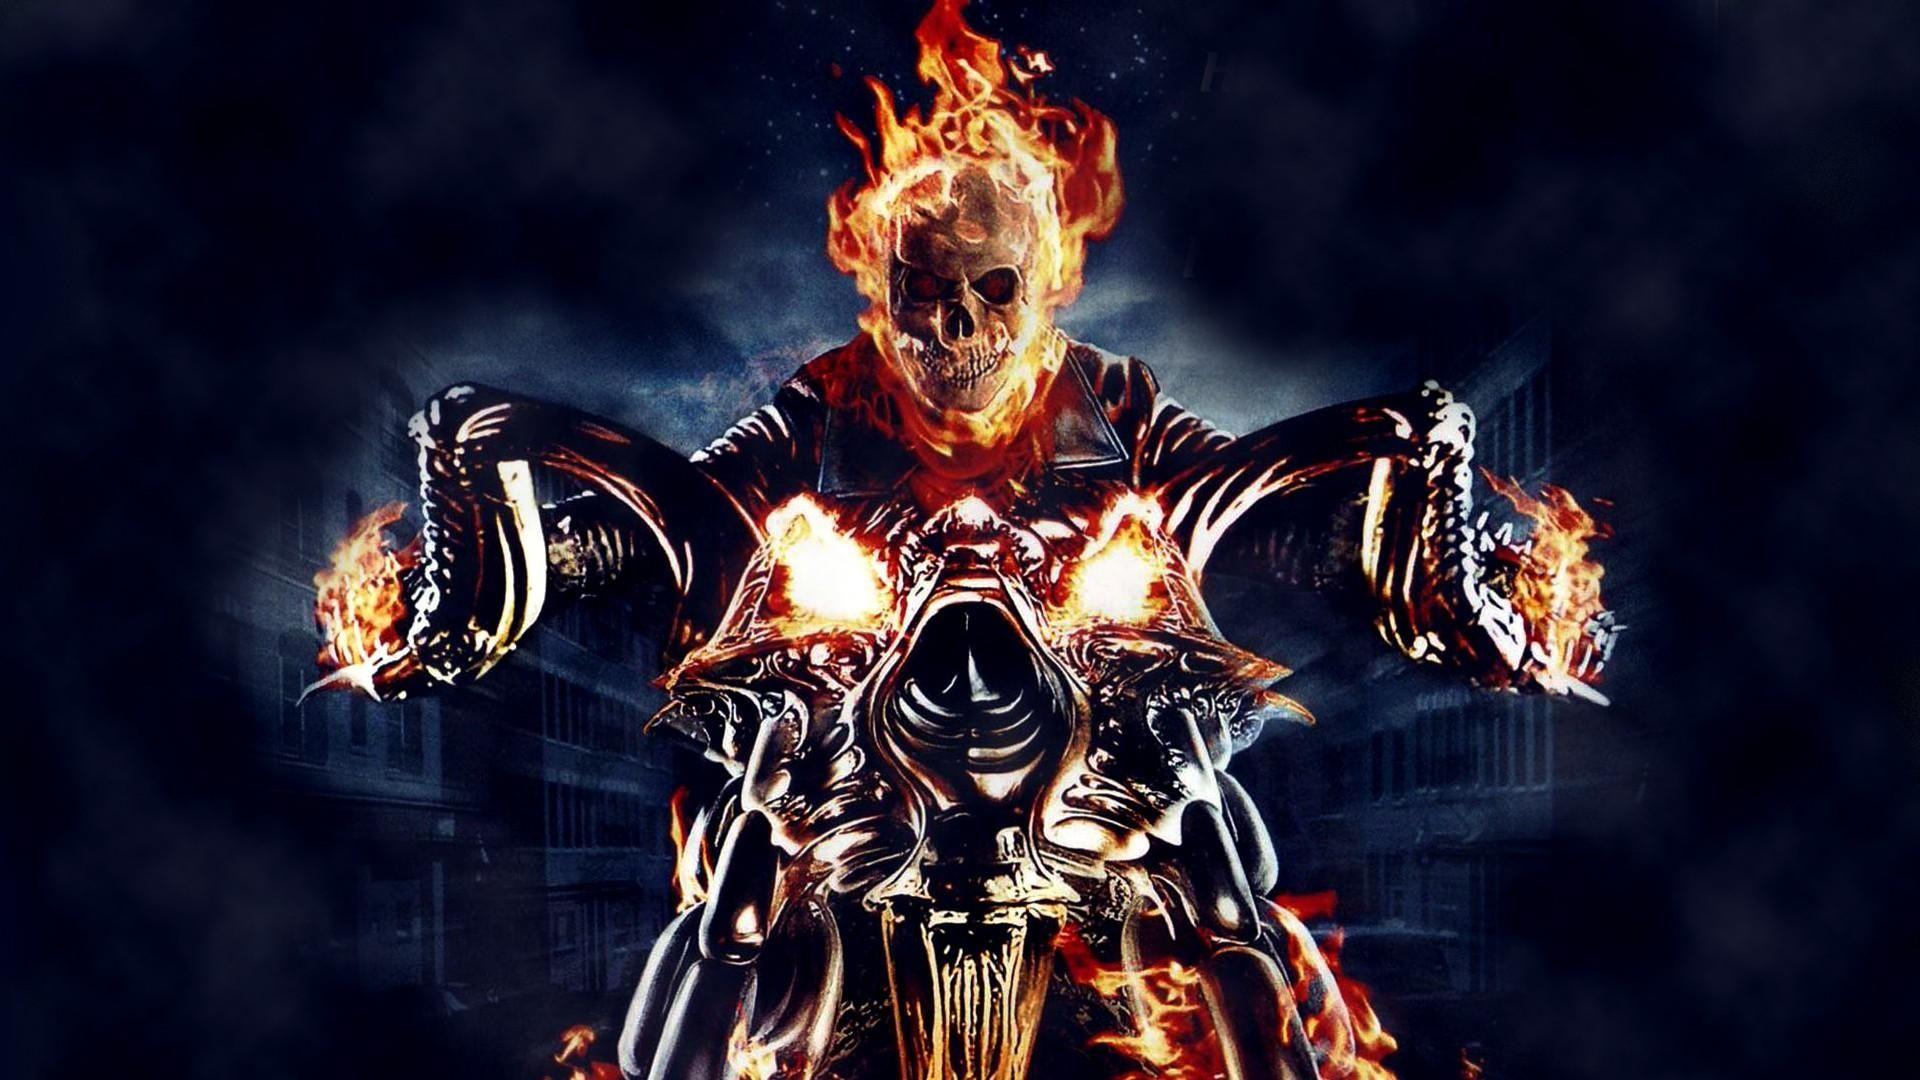 Download Wallpaper 1920x1080 ghost rider, motorcycle, fire, fog Full